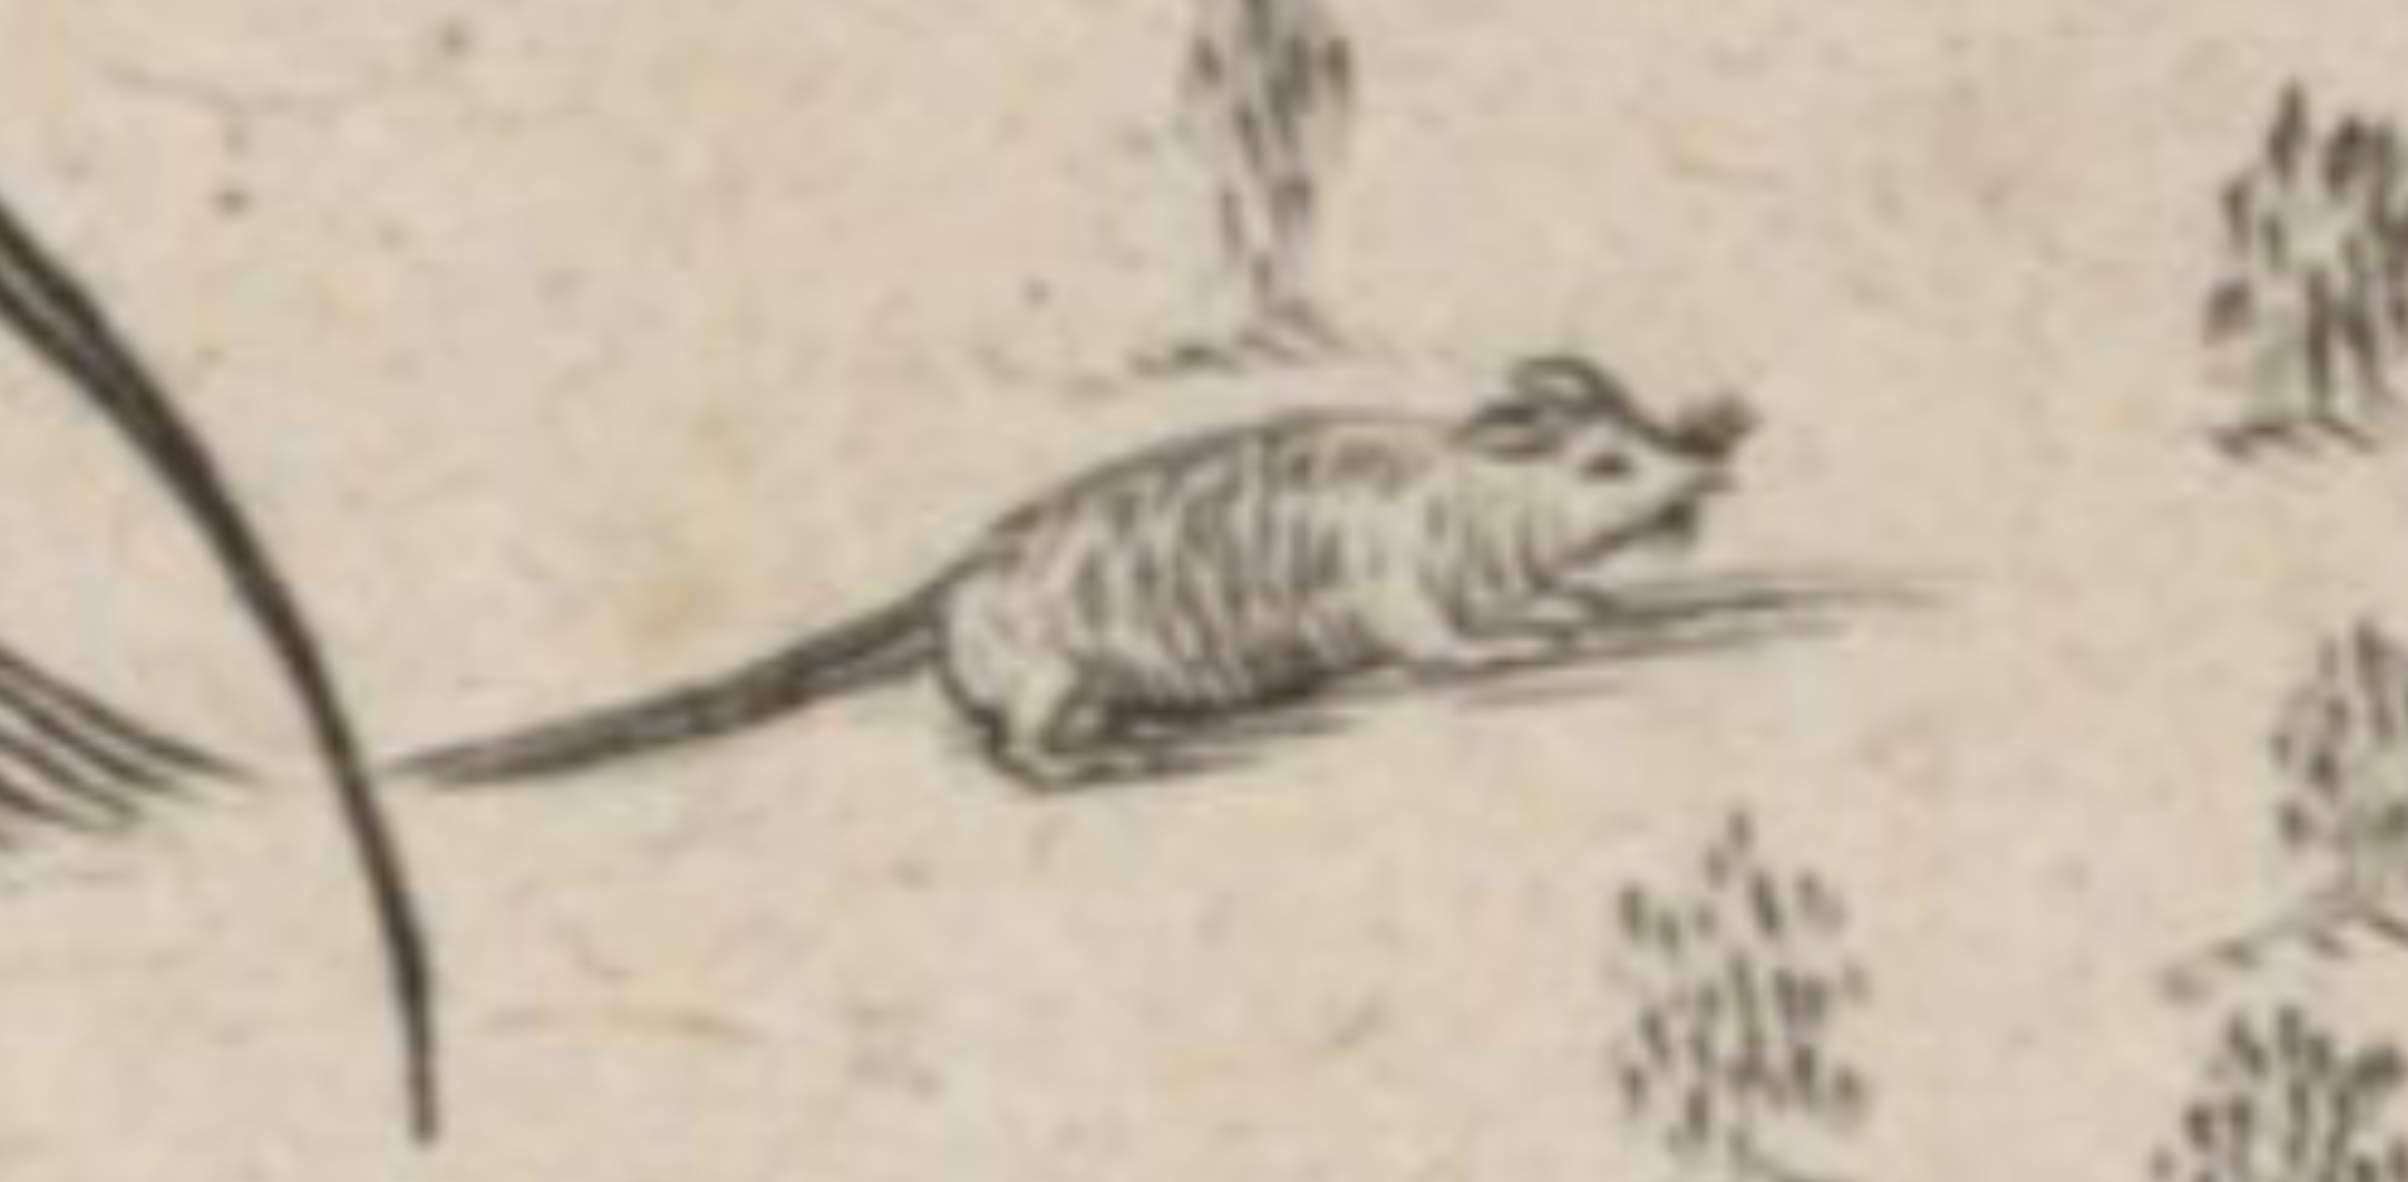 Drawing detail of a map drawn by Samuel de Champlain showing a mouse